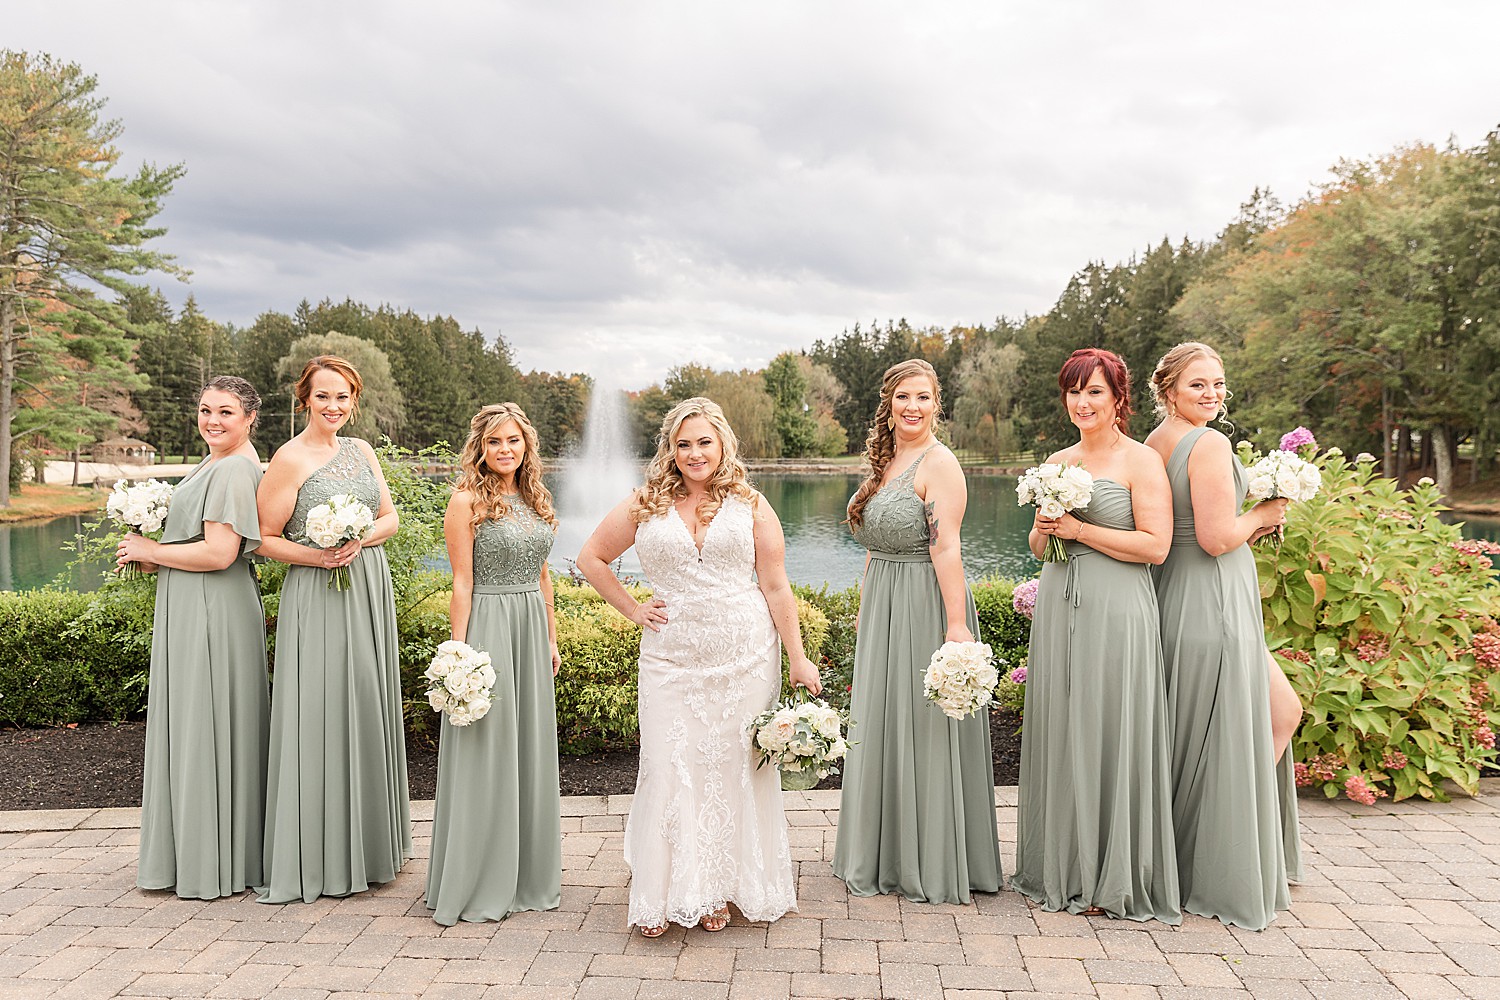 bride in the center with her bridesmaids around her and water fountain in background 